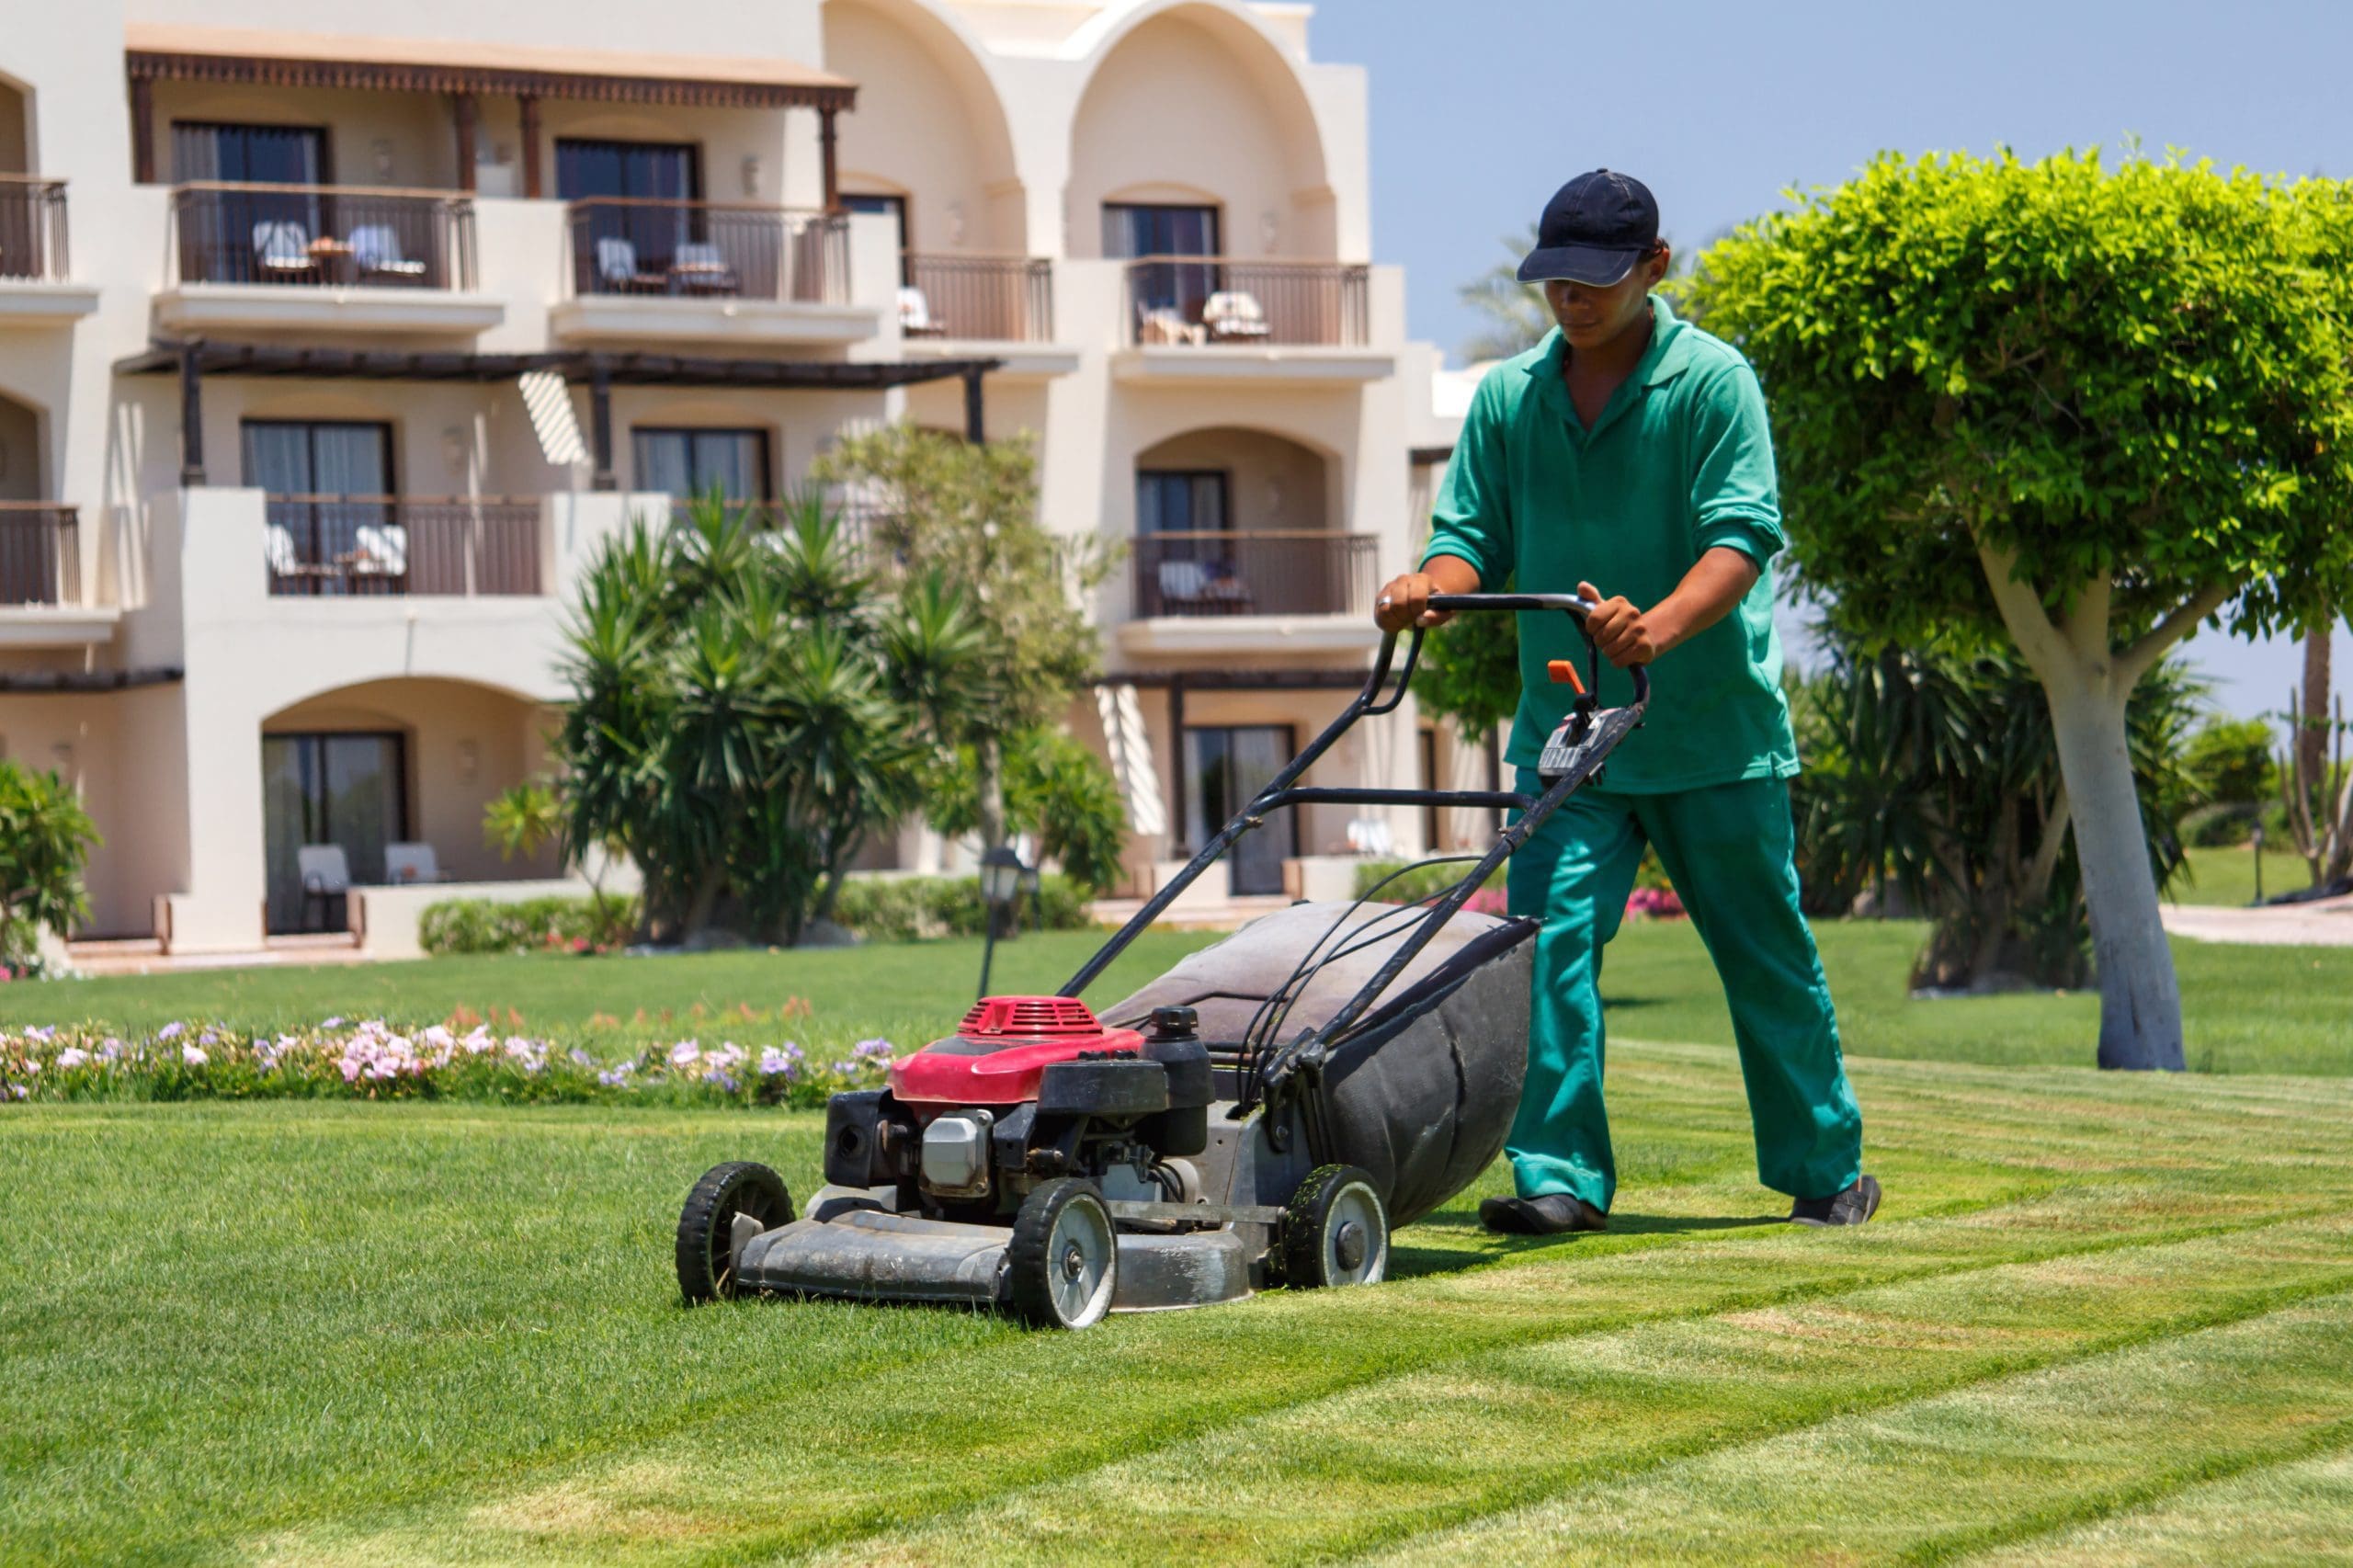 Lawn Care Logos: Why They Matter